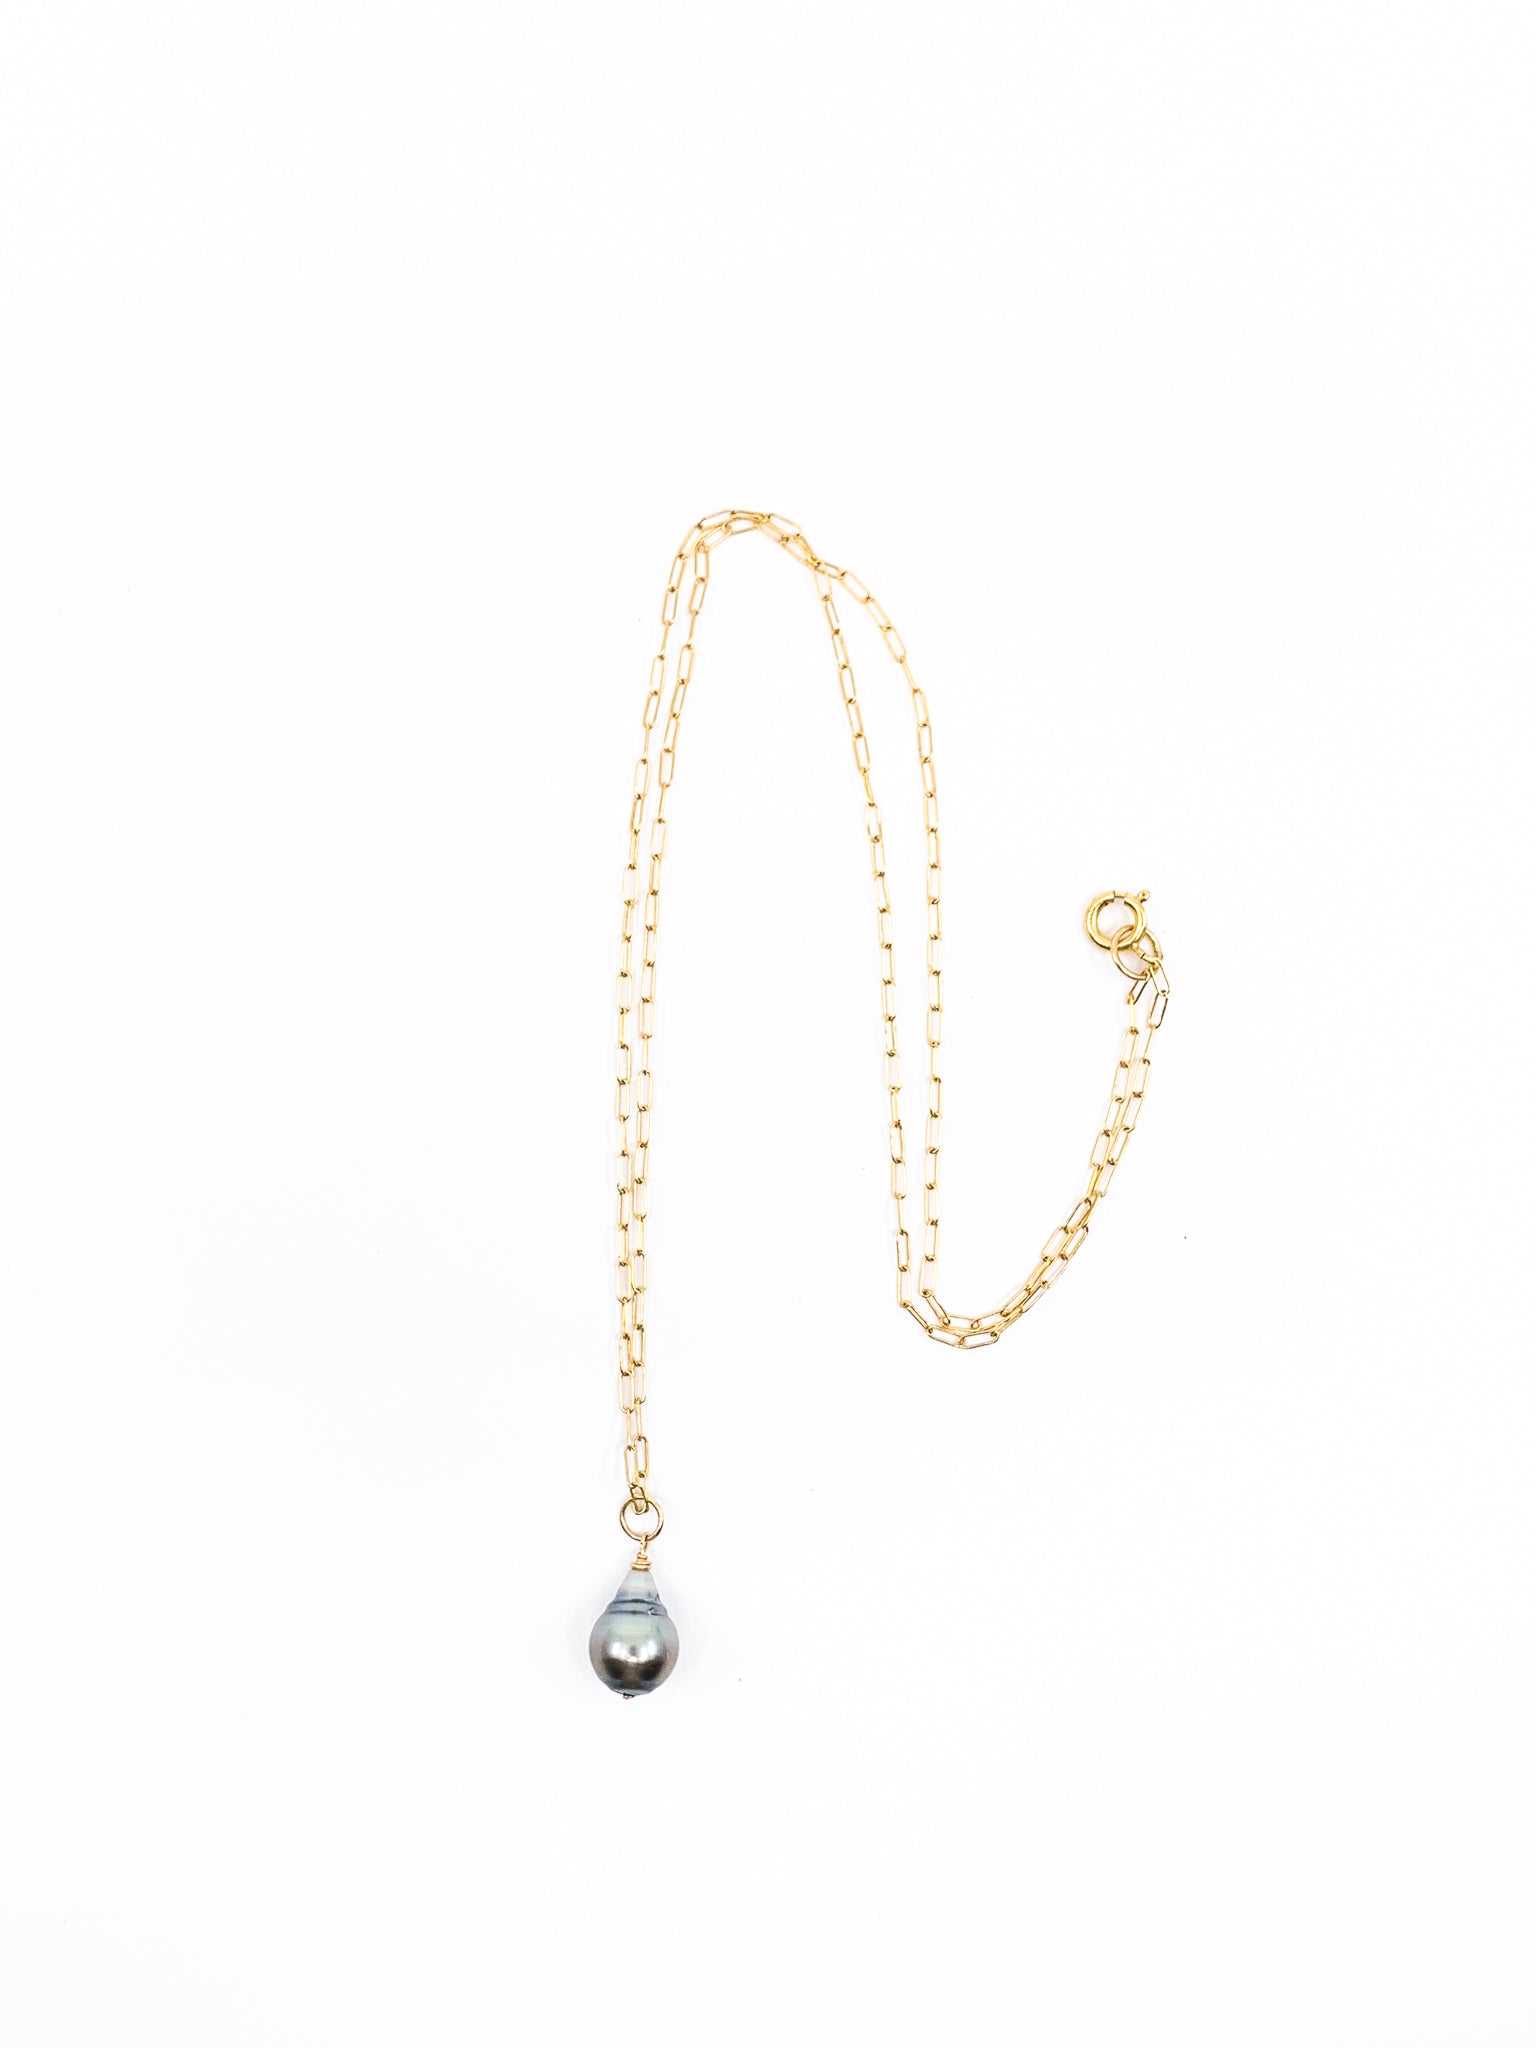 simple Tahitian pearl gold necklace by eve black jewelry made in Hawaii